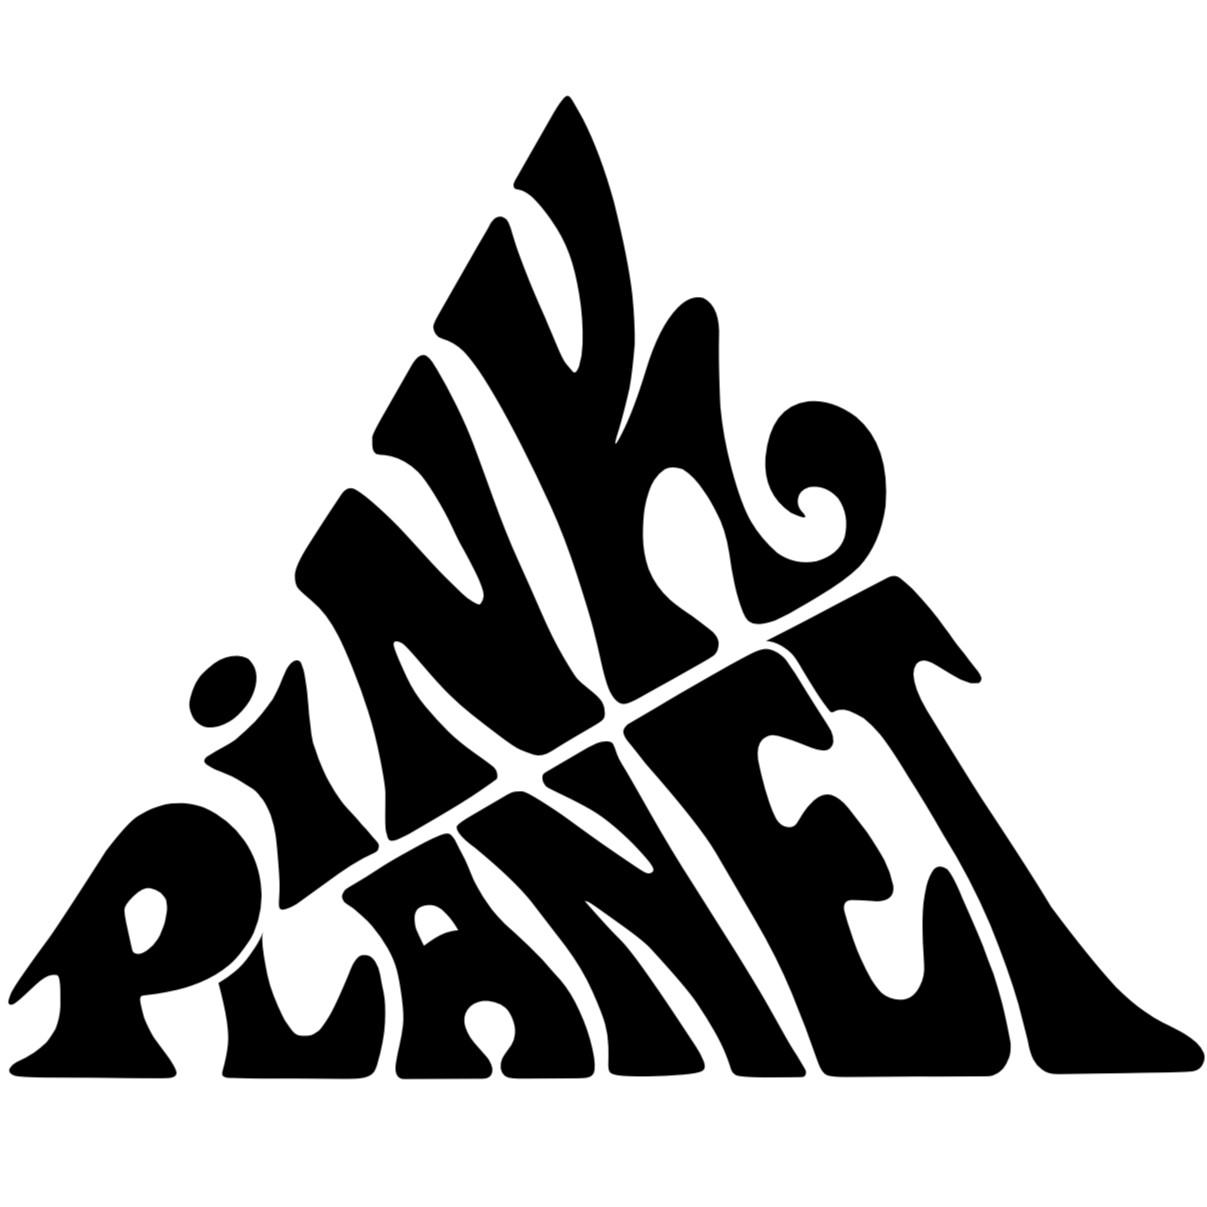 Pink Planet - Another Pink Floyd Tribute